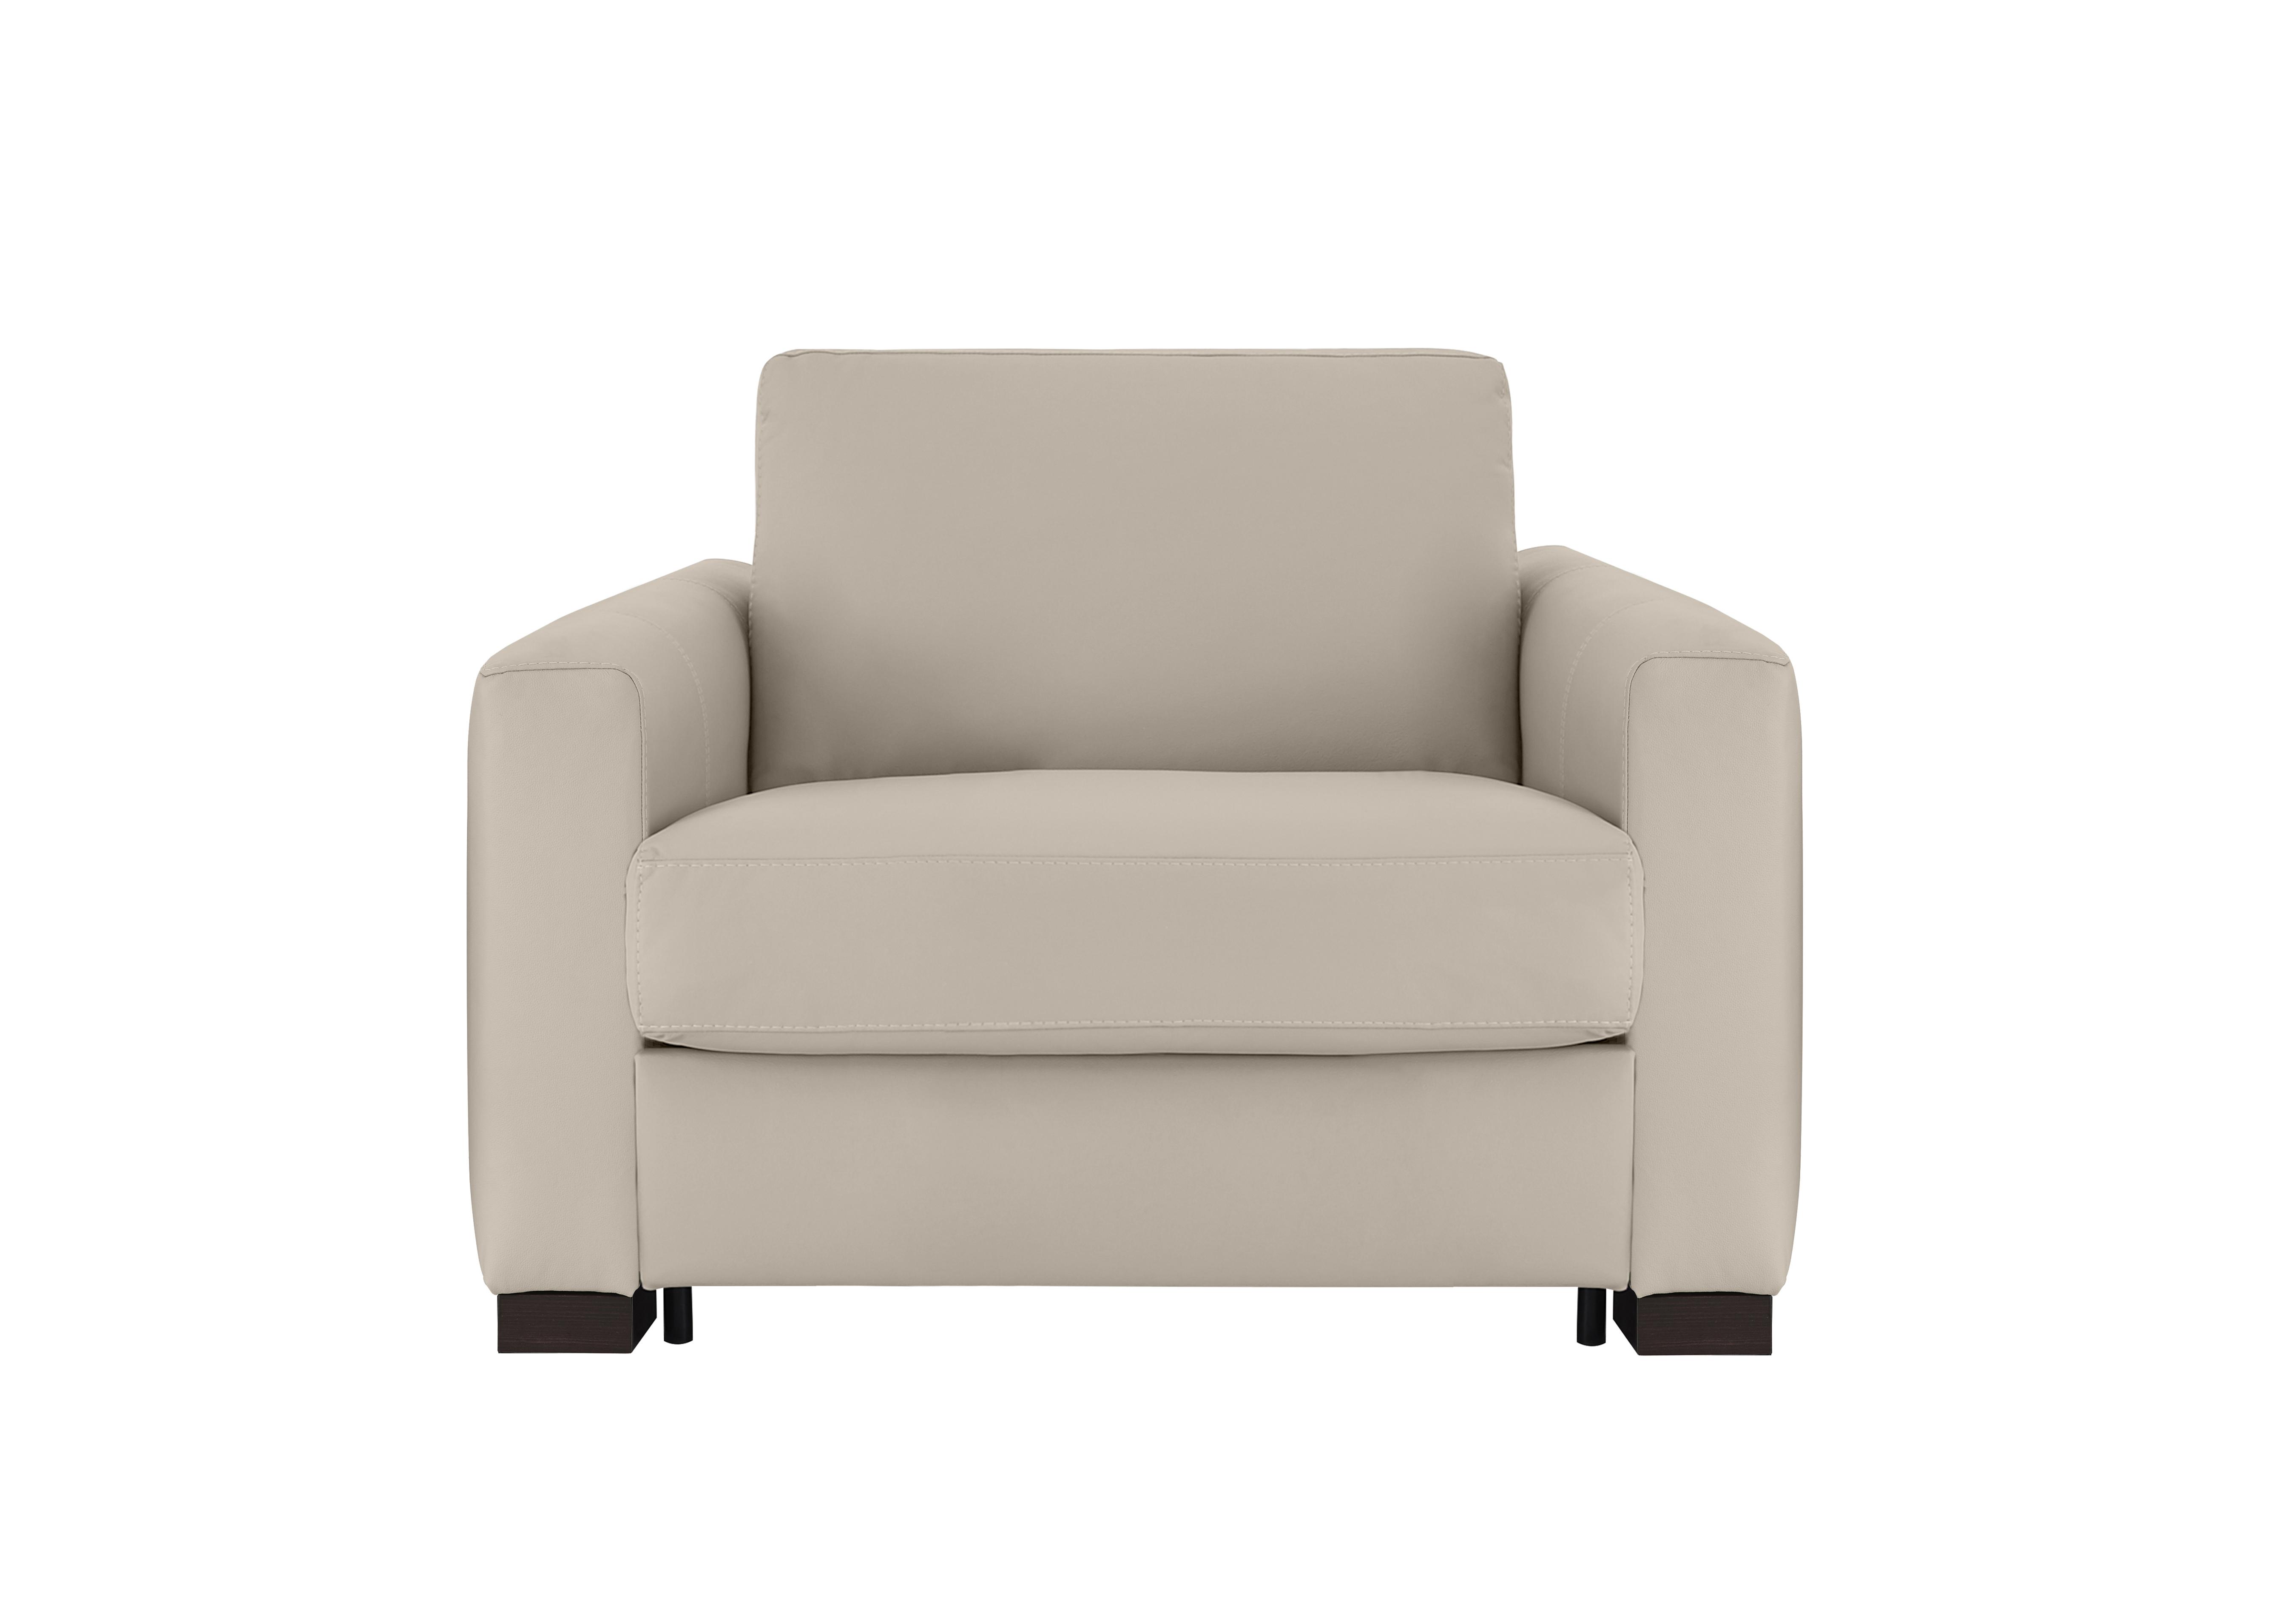 Alcova Leather Chair Sofa Bed with Box Arms in Botero Crema 2156 on Furniture Village